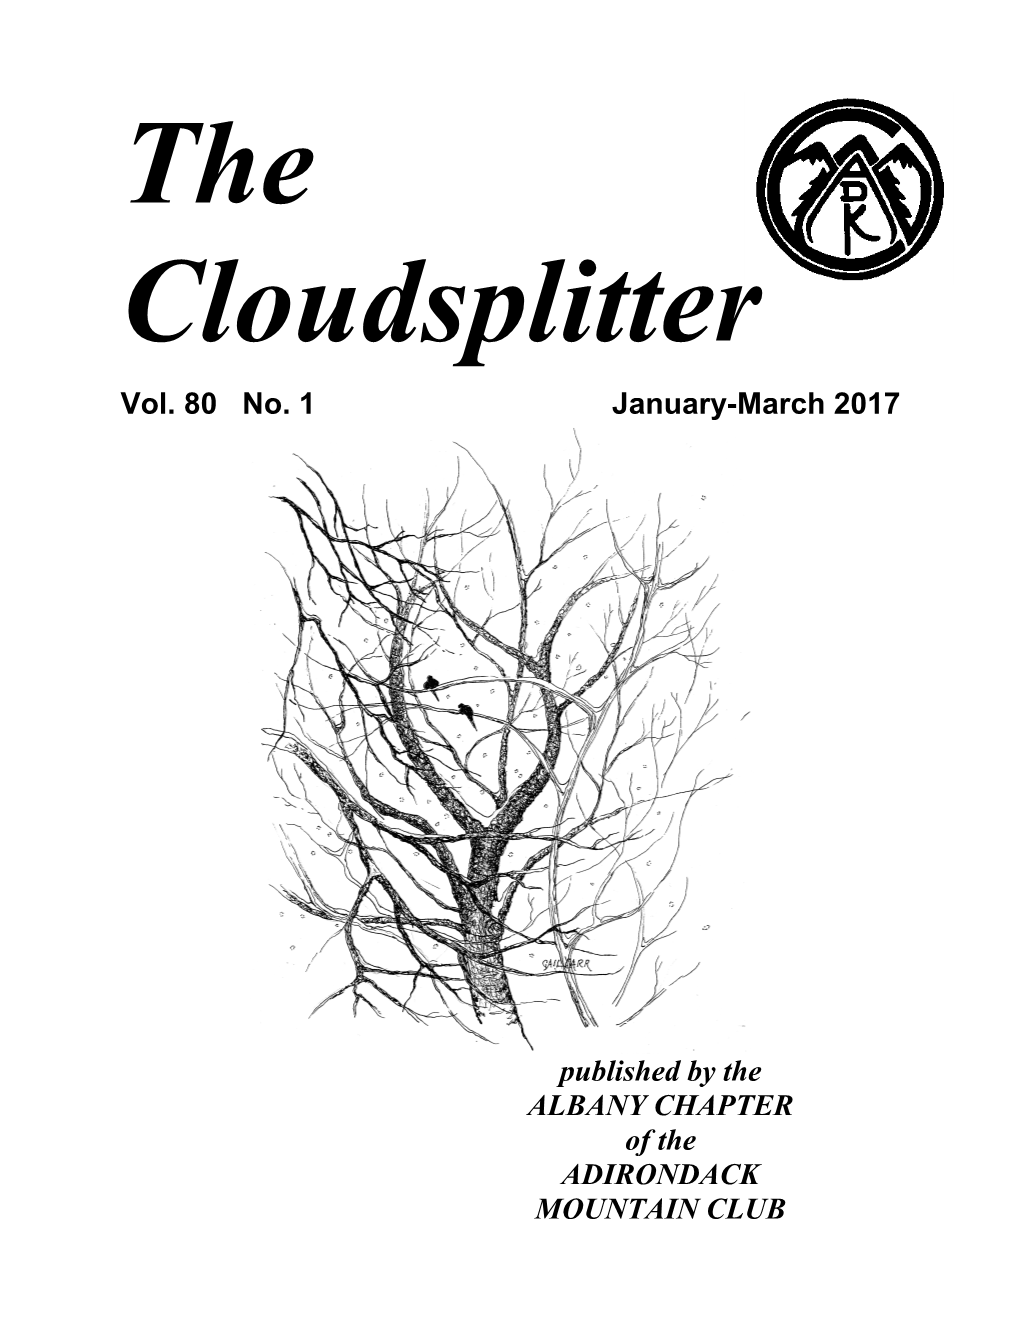 Vol. 80 No. 1 January-March 2017 Published by the ALBANY CHAPTER of the ADIRONDACK MOUNTAIN CLUB